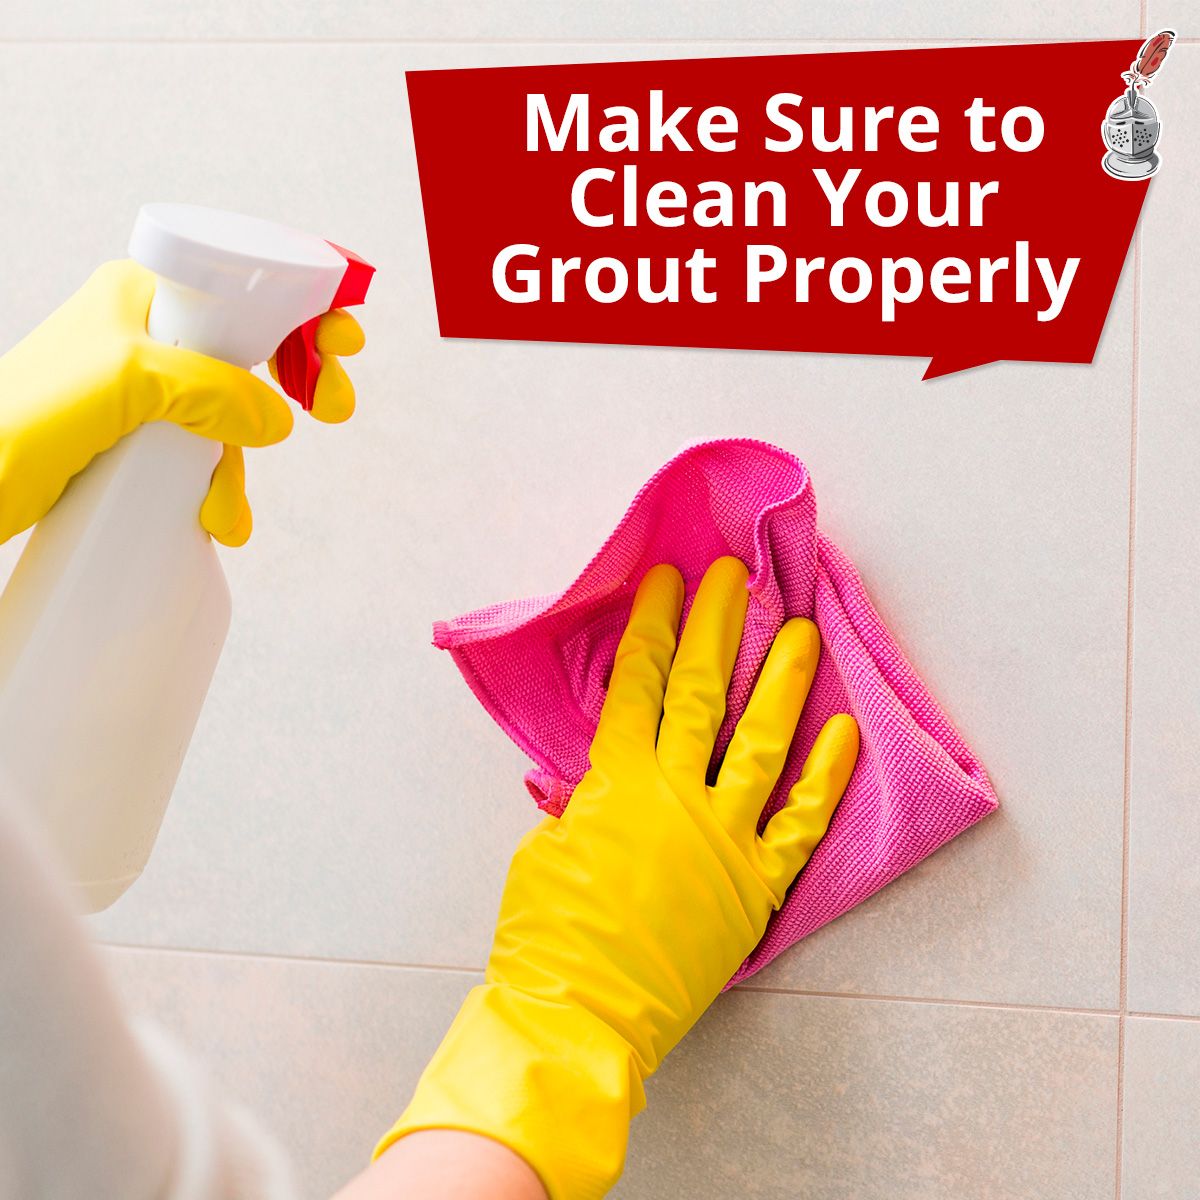 Make Sure to Clean Your Grout Properly